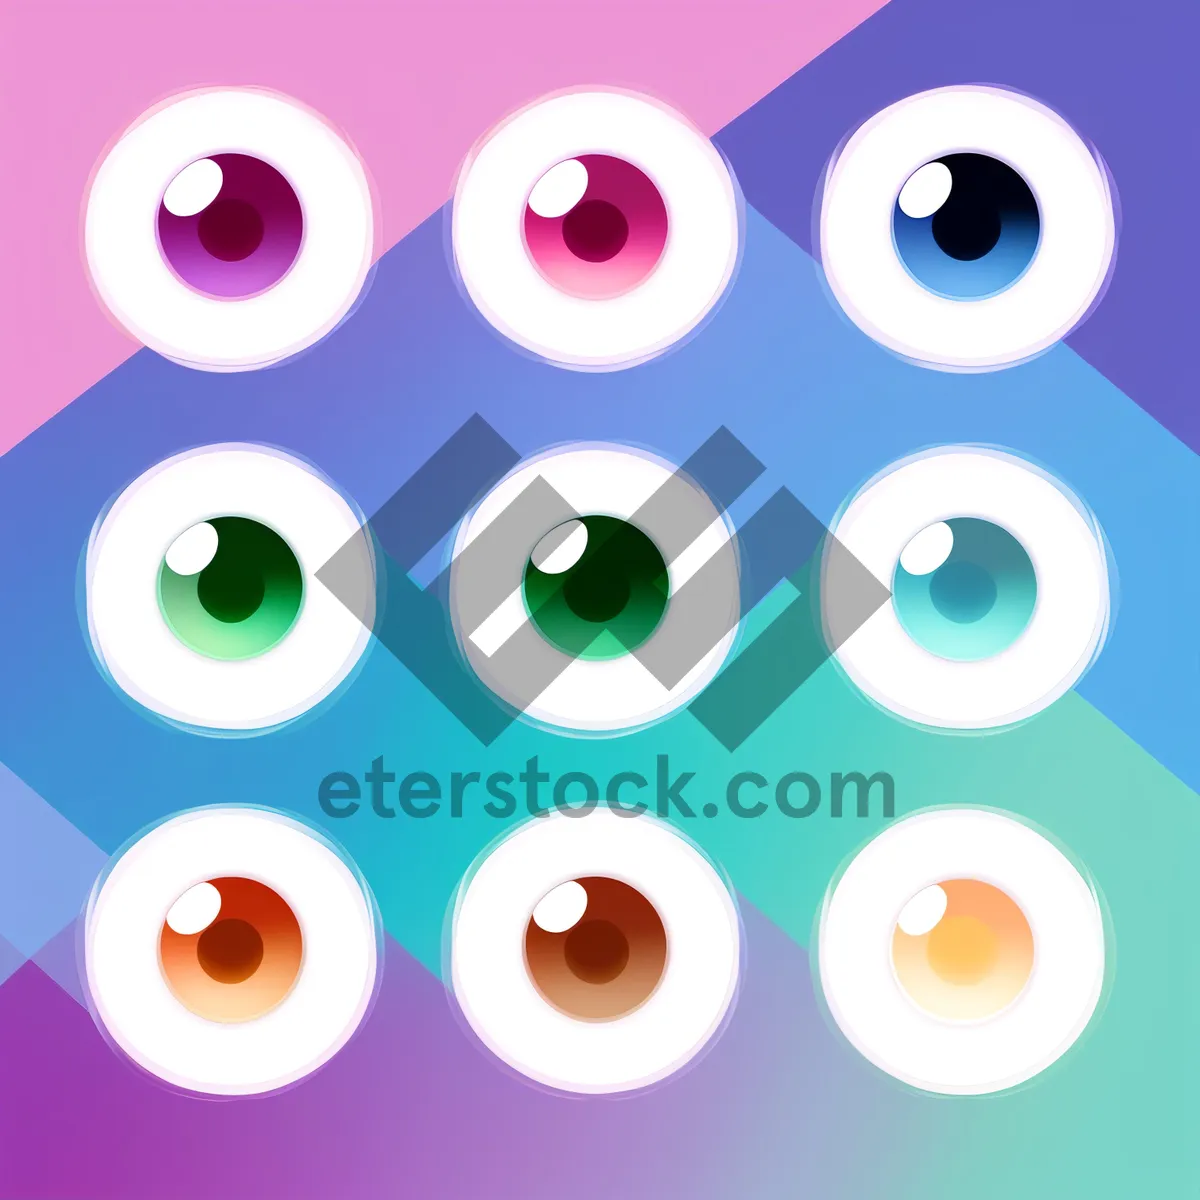 Picture of Colorful Circular Pattern on Retro Stationery